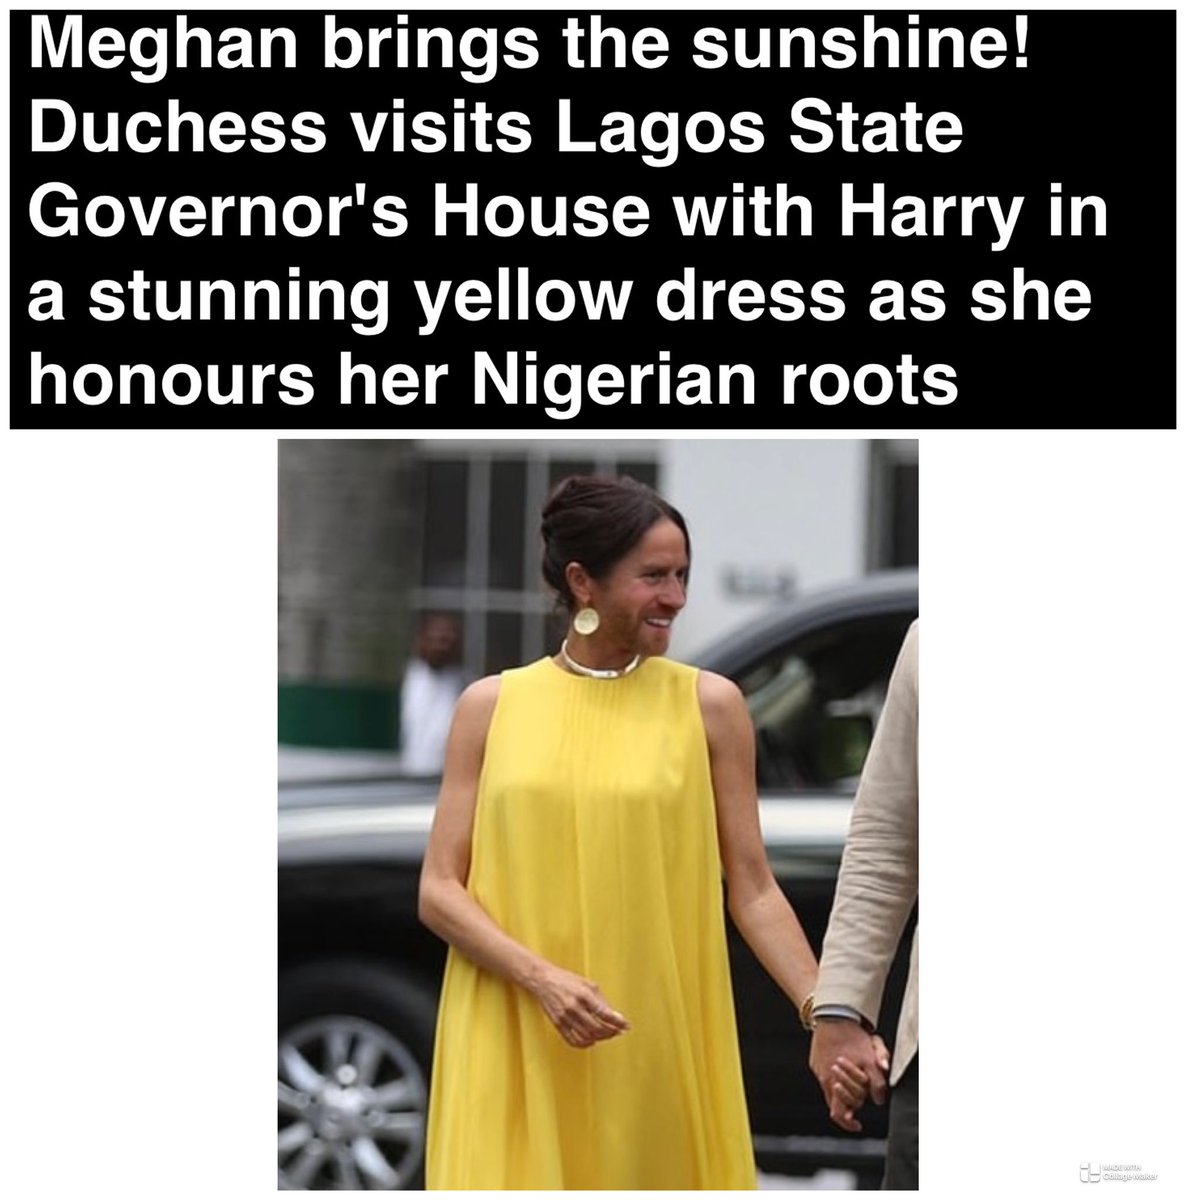 Sometimes headline writers do all my work for me.... 'with Harry in a stunning yellow dress'......